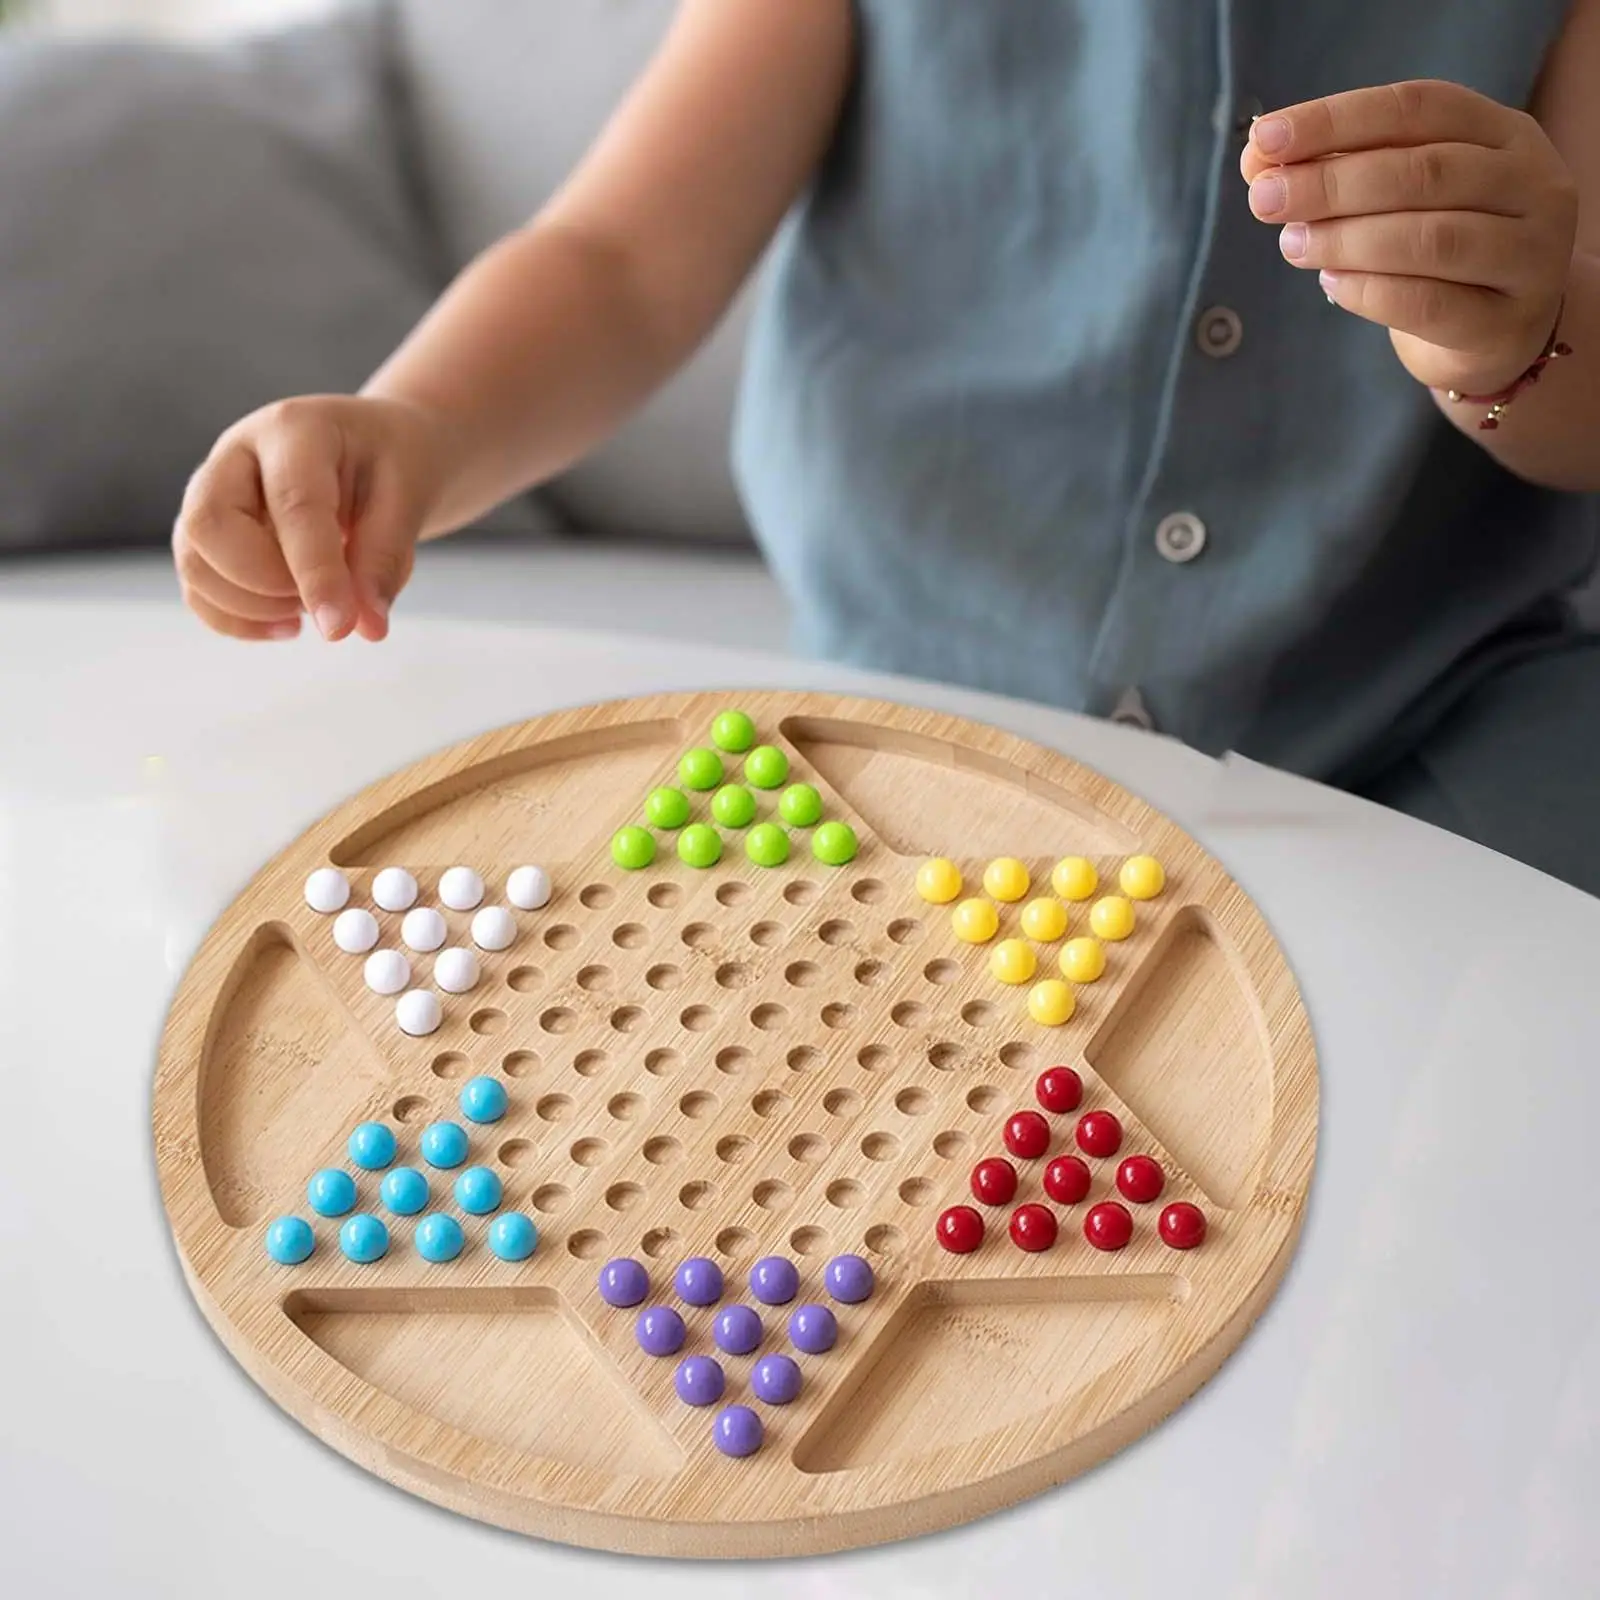 Chinese Checkers Game Set 11.4inch Classic Strategy Game 60 Acrylic Marbles in 6 Colors for Family Gathering Kids Boys Girls